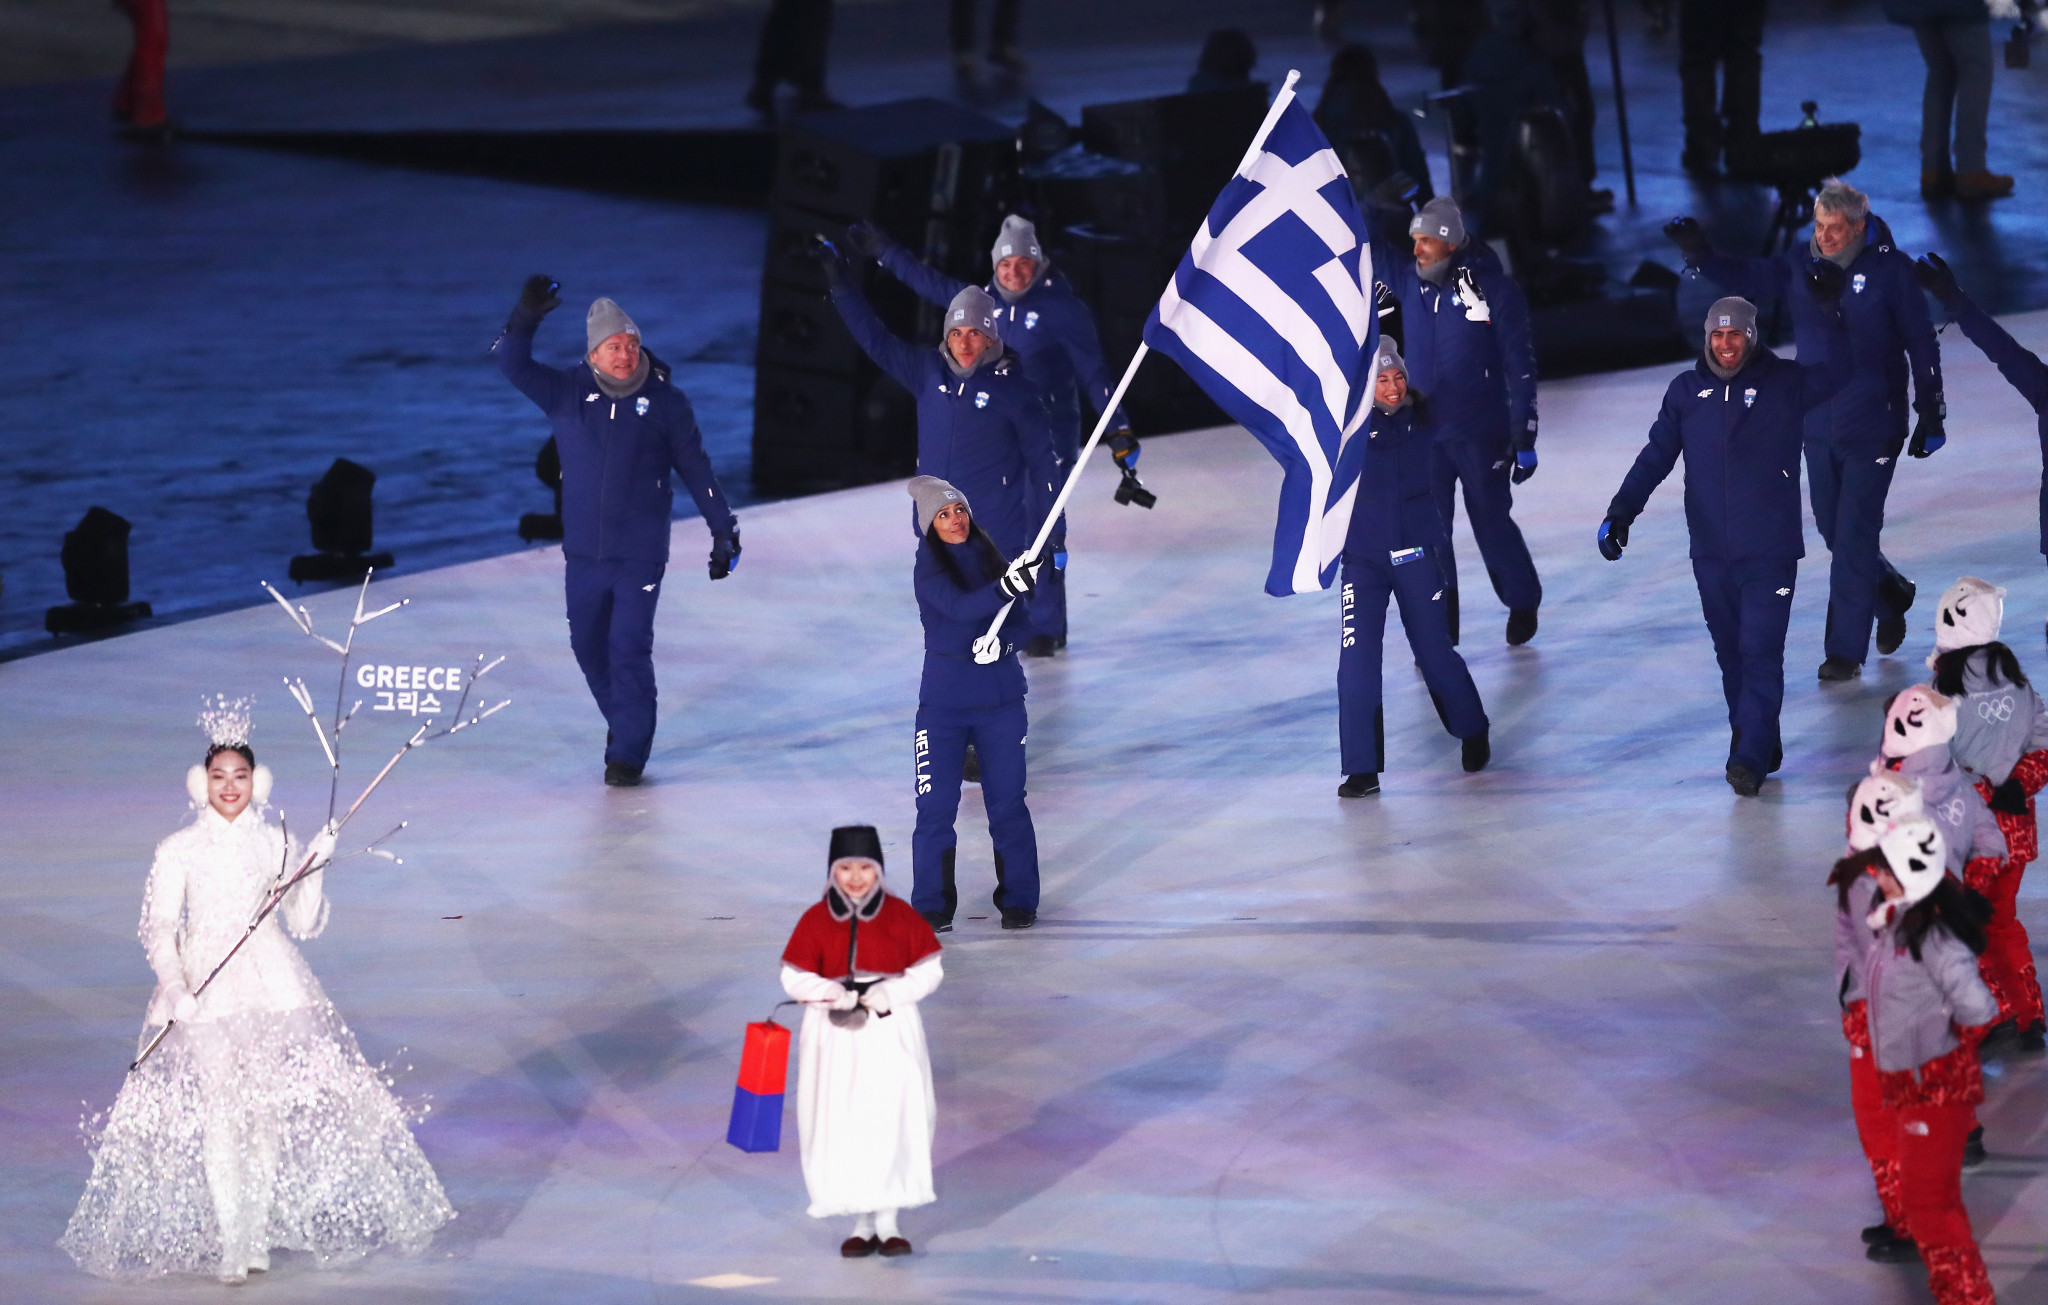 Olympic-bound athletes are to be allowed to use sports facilities in Greece due to easing restrictions ©Getty Images